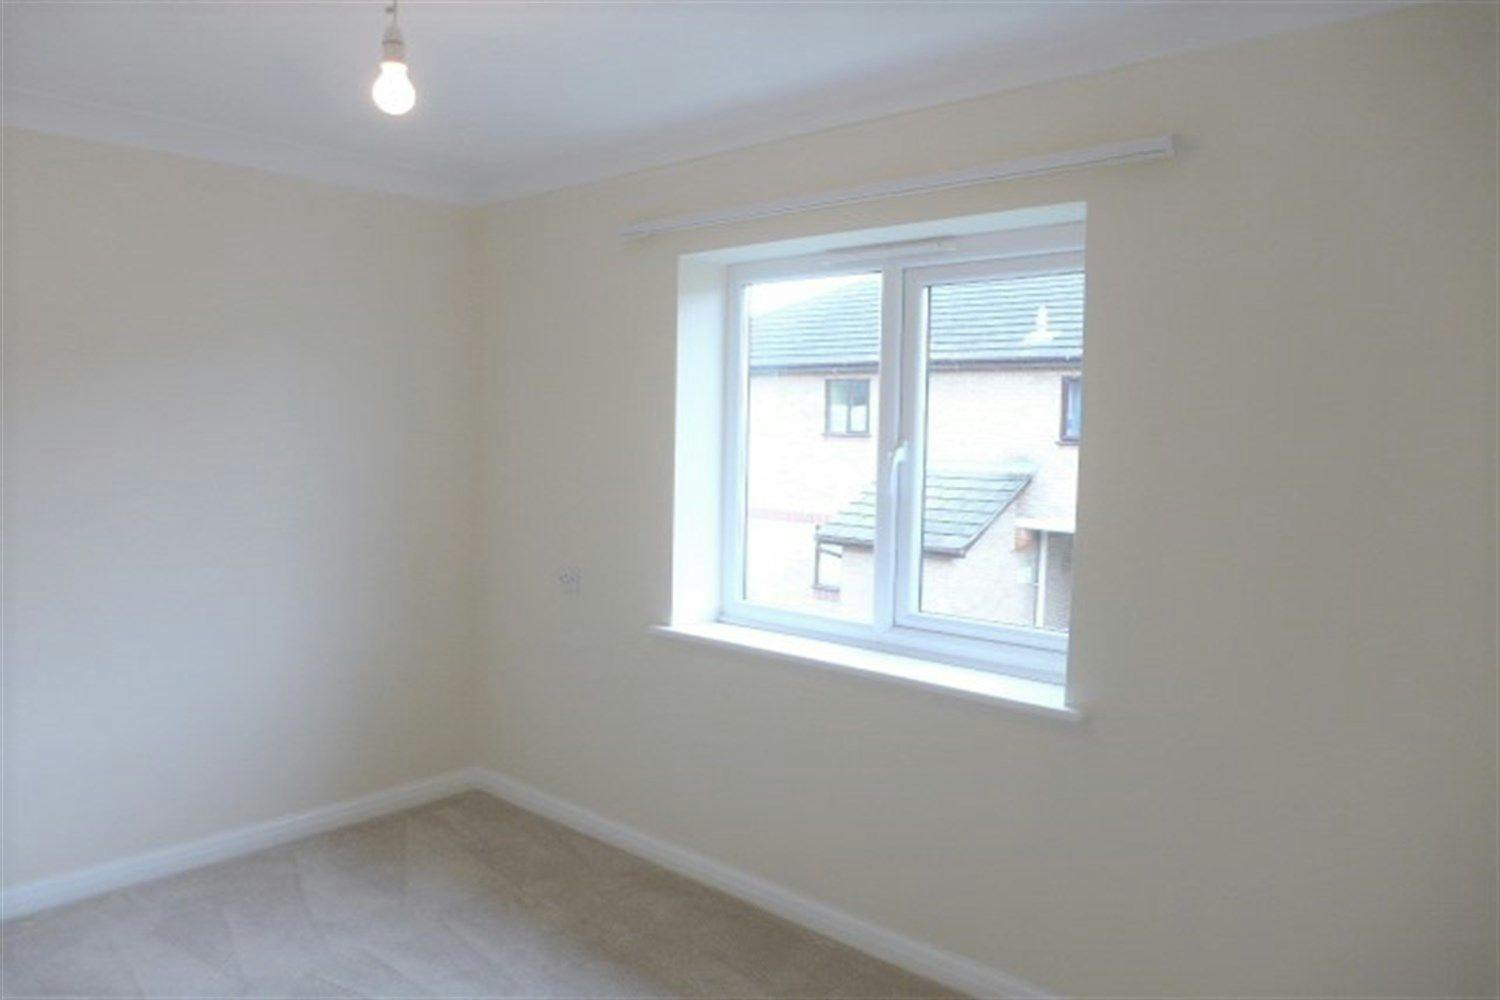 Bedroom at East Haven RetirementApartment in Clacton-on-Sea, Tendring